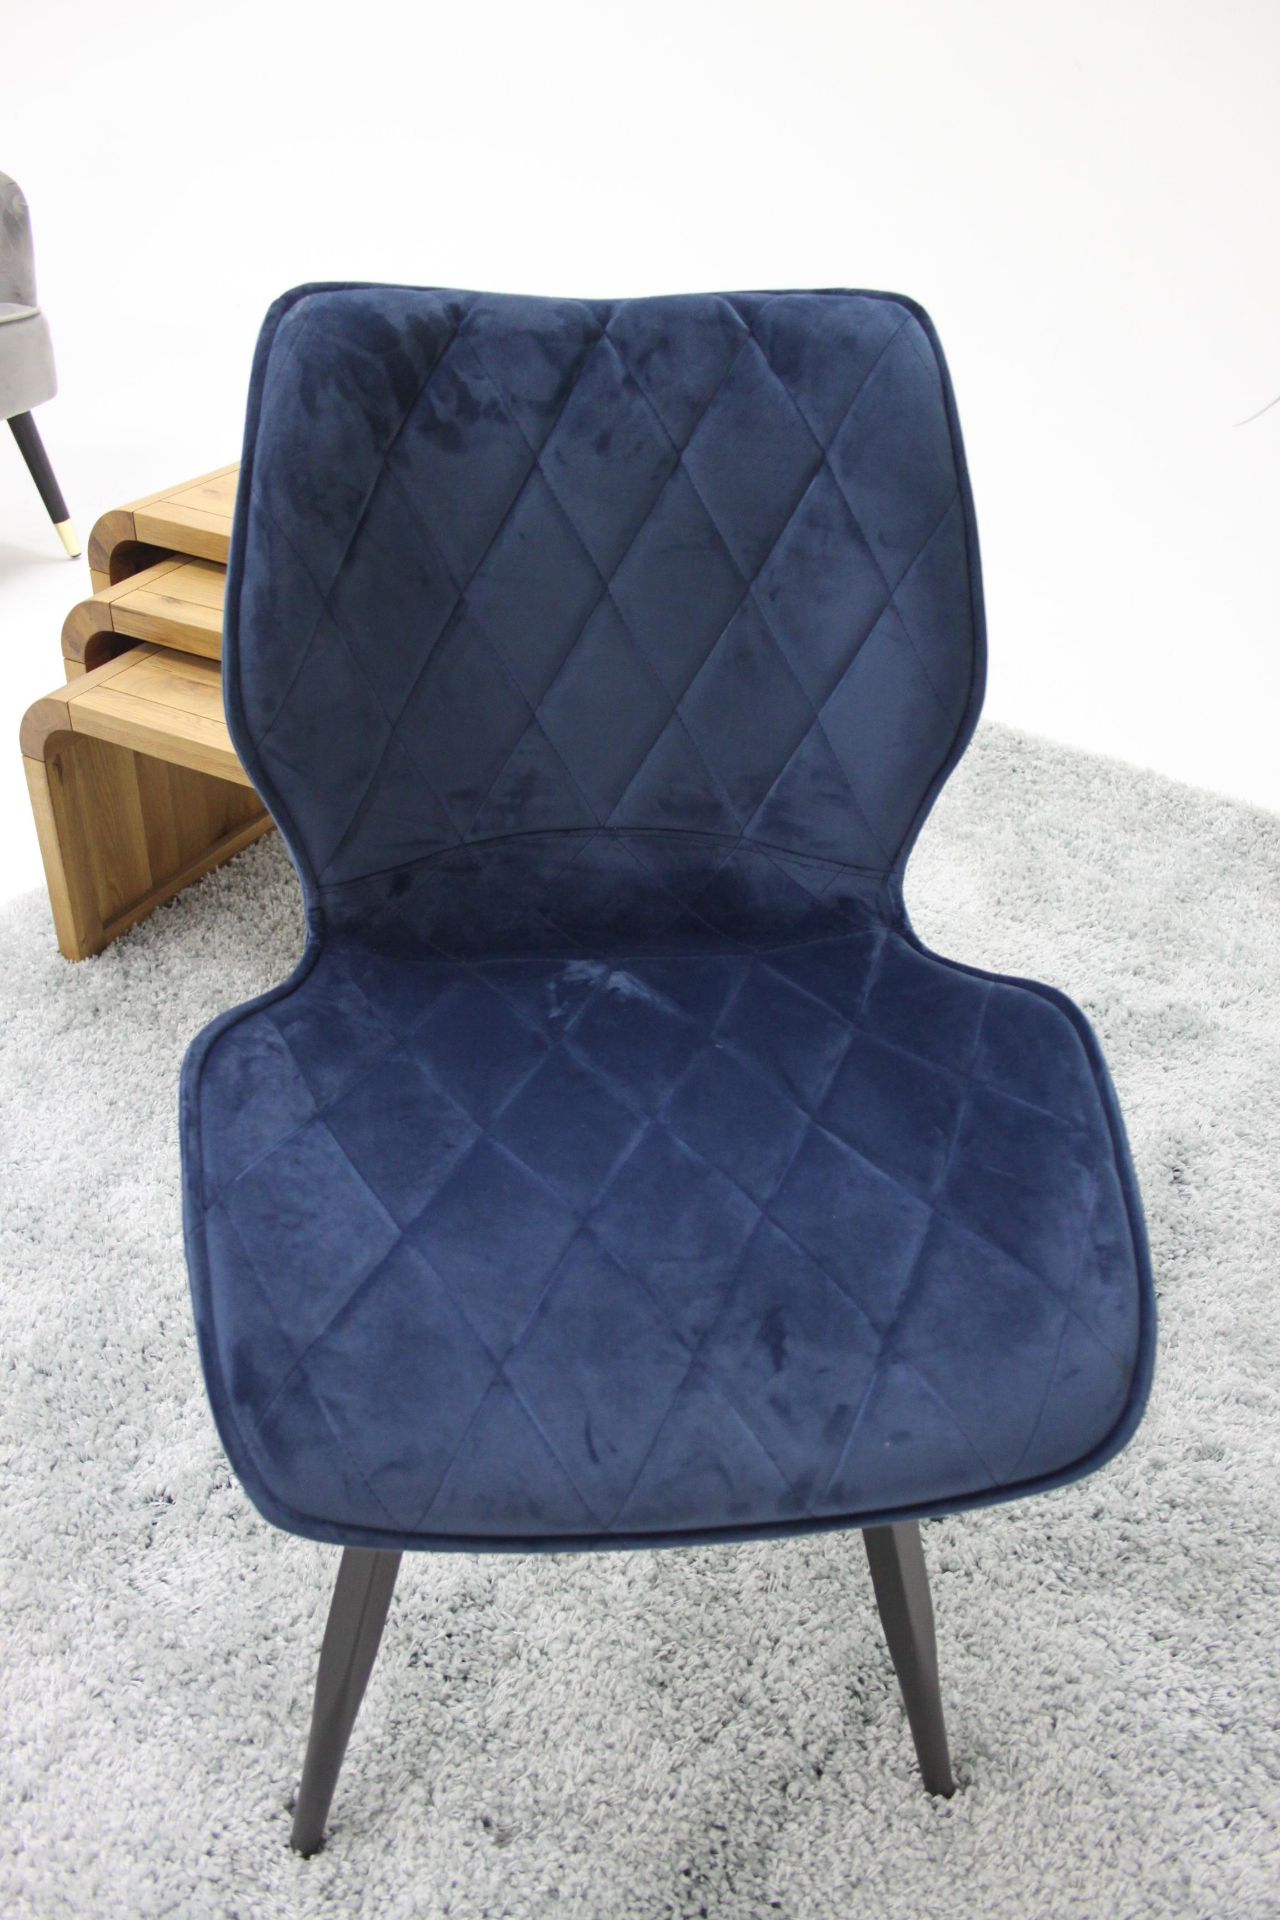 Alfa Diamond Dining Chair Blue Diamond Quilted Upholstery Gives A Luxury Finish To These Stylish - Image 2 of 2